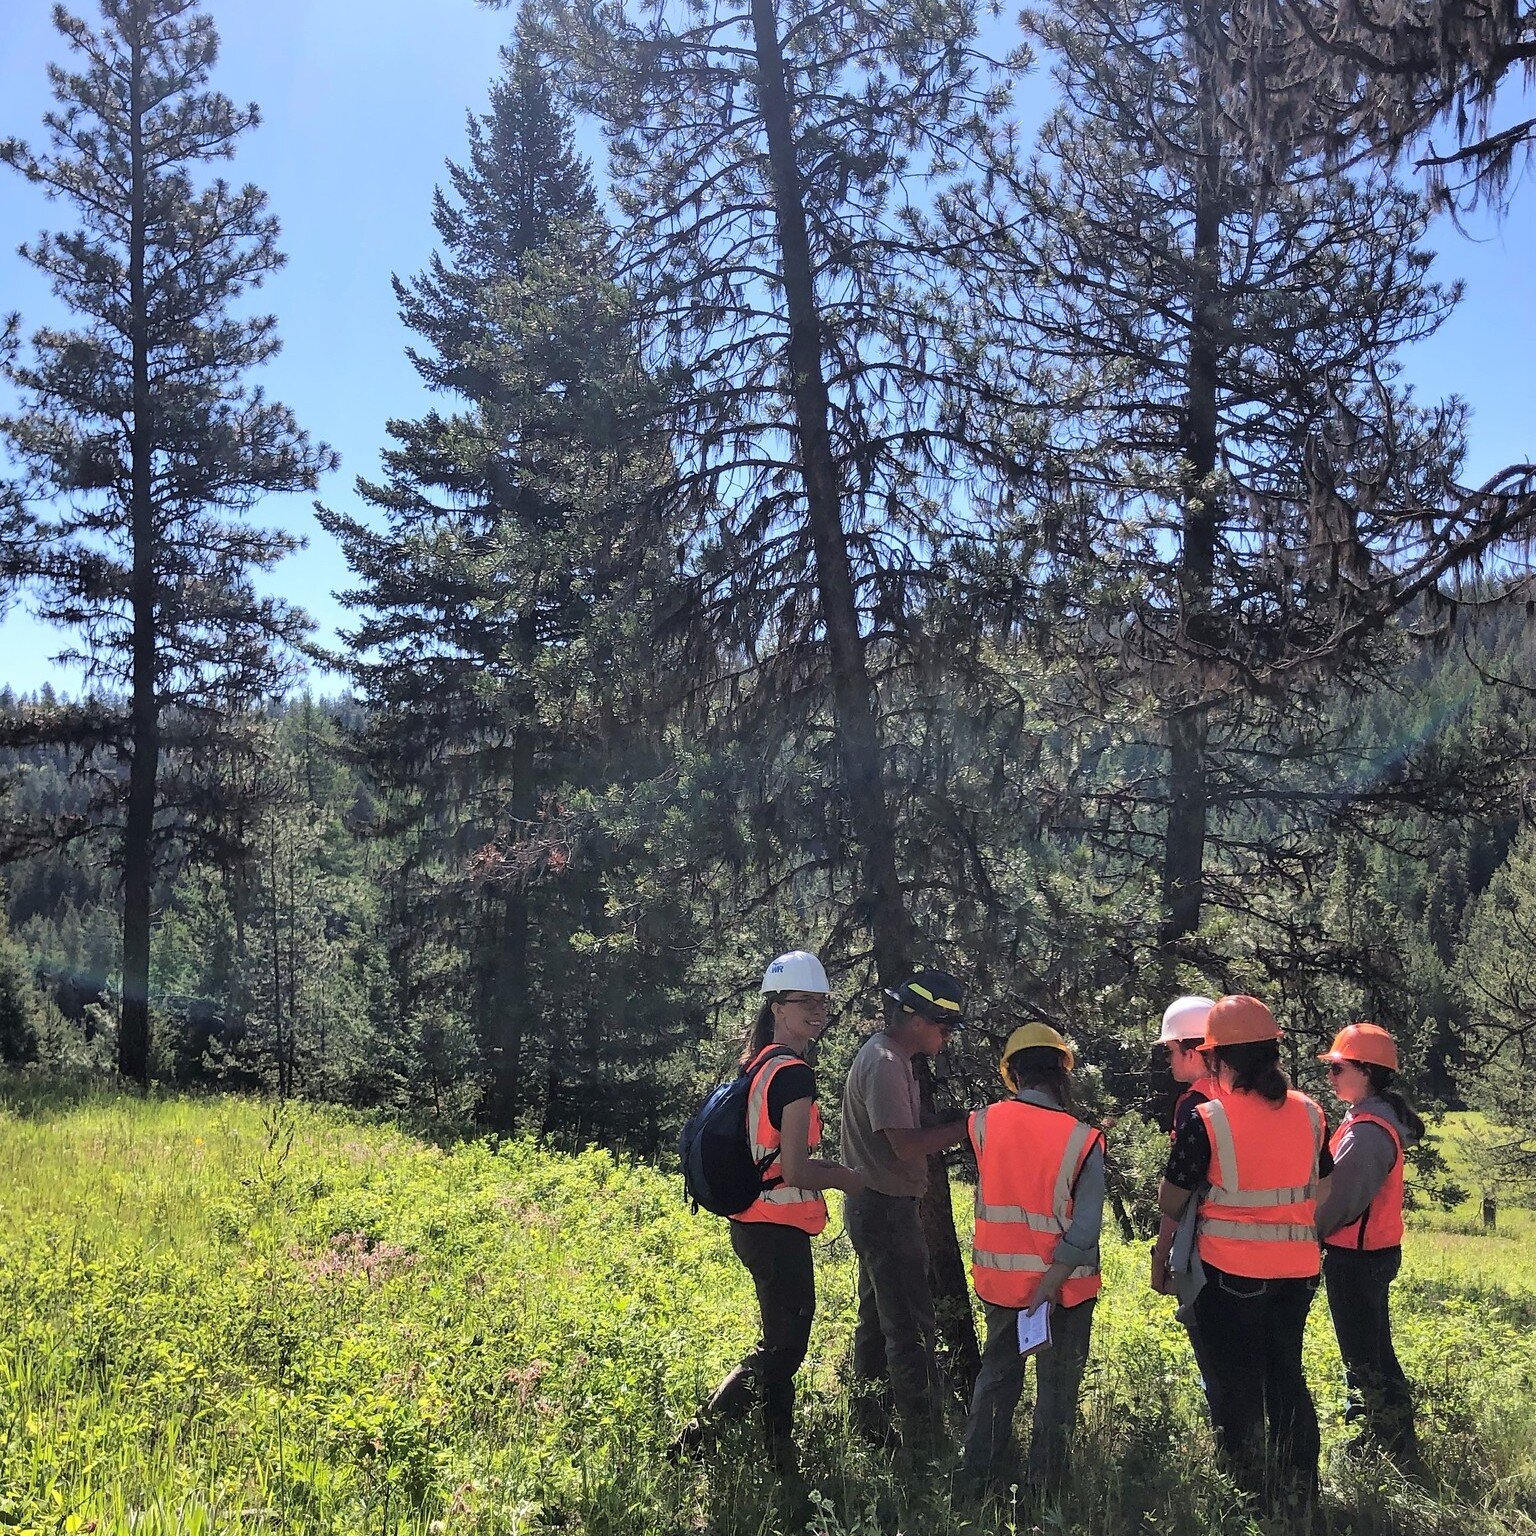 High schoolers! It's not too late to apply for our HAWK Internship! Applications close this Sunday. WR Hawk Internship is an 8-week PAID internship that allows participants to experience many professions within Natural Resources and the outdoors! It'